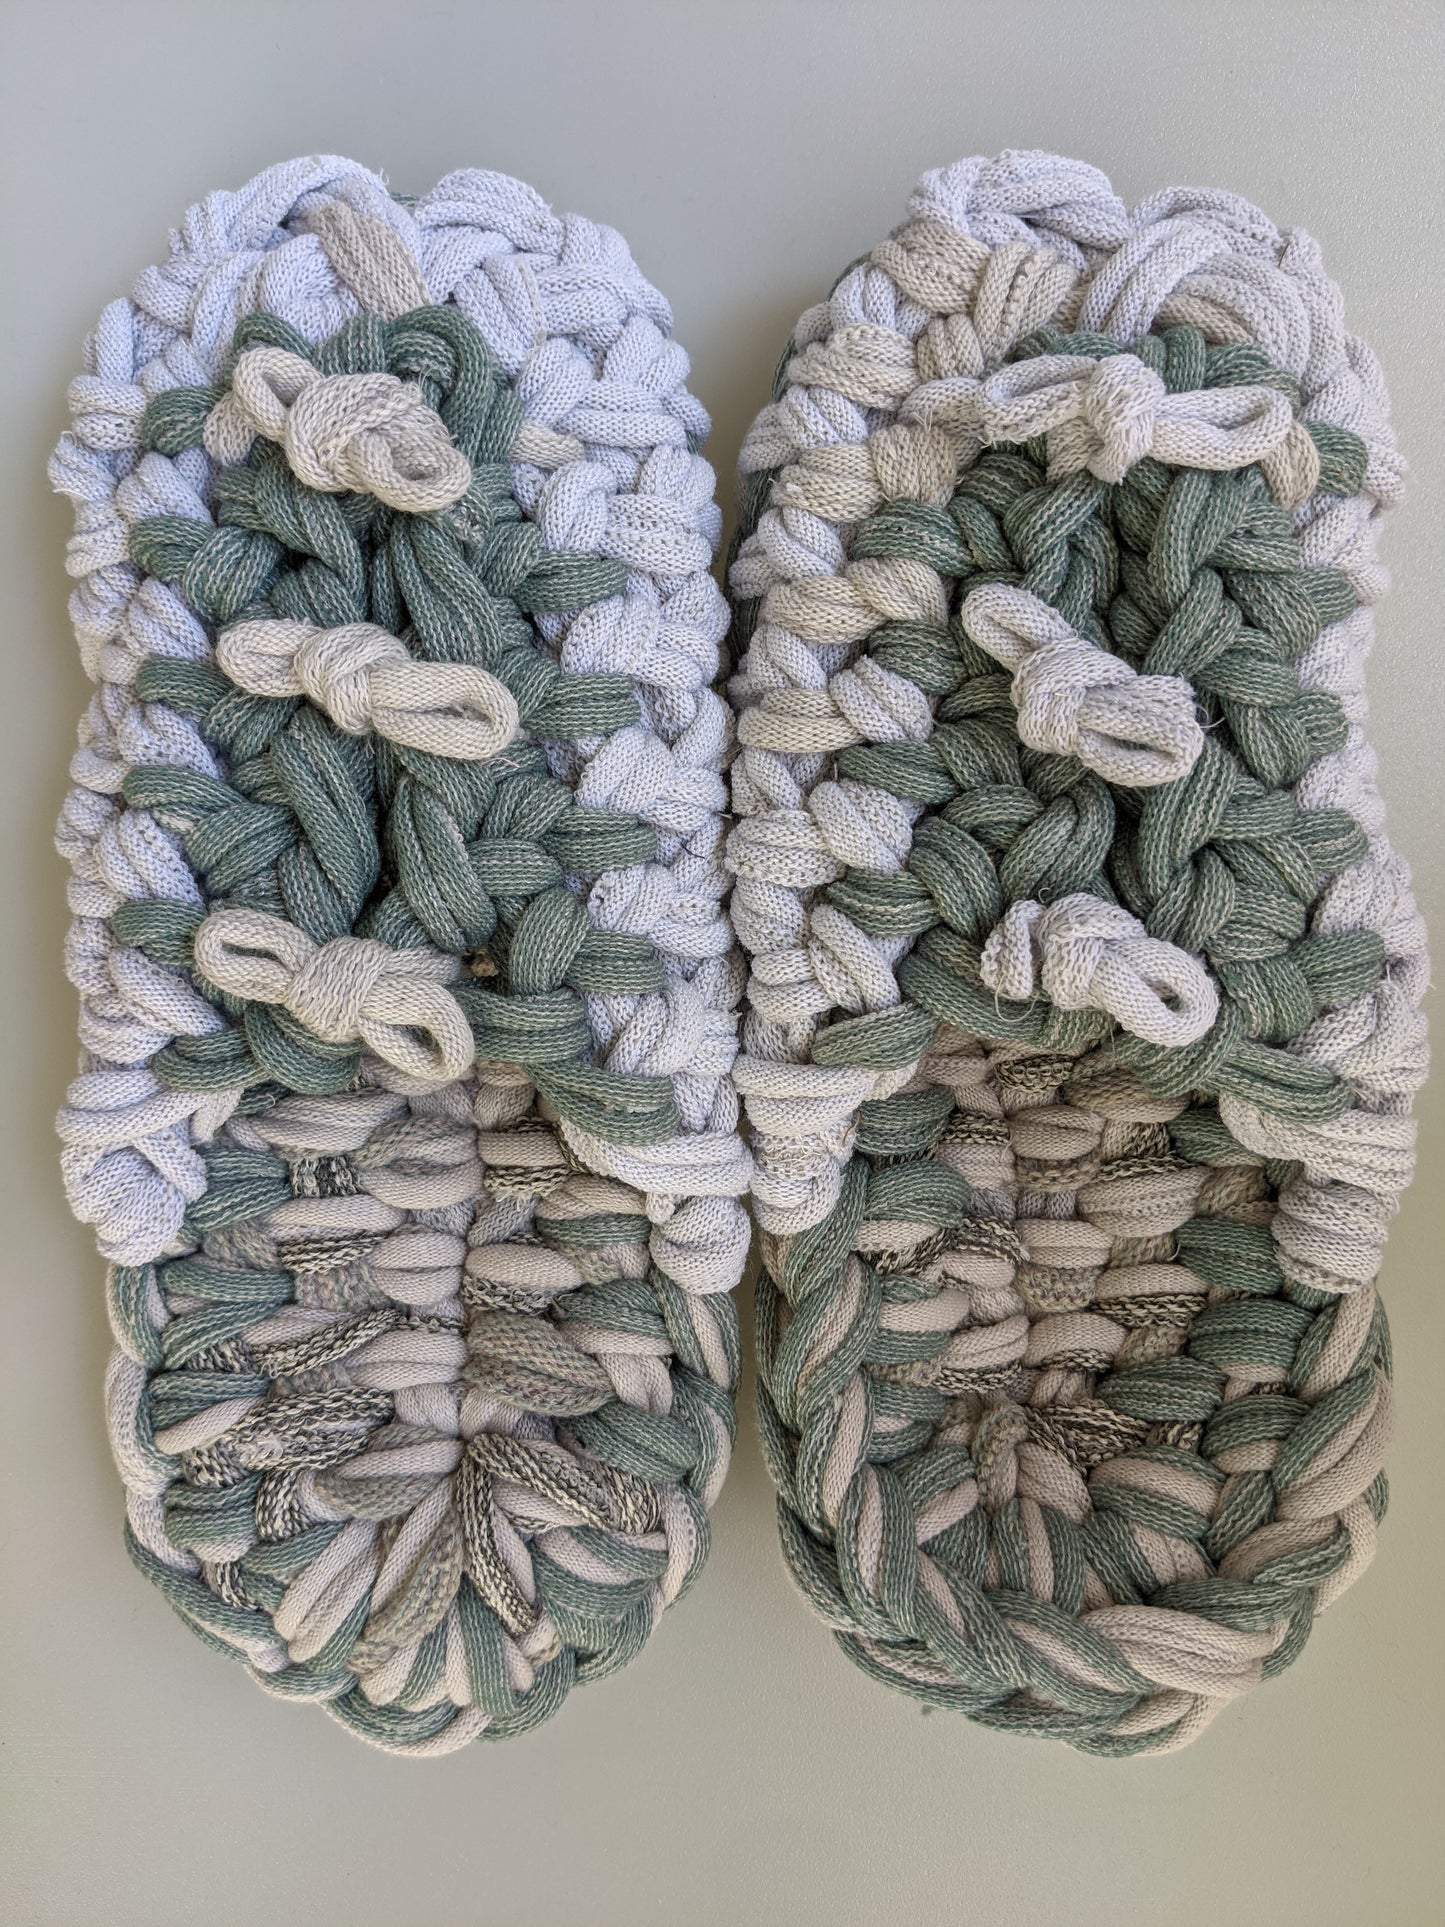 Large | Knit upcycle slippers 2021-L28 [Large]